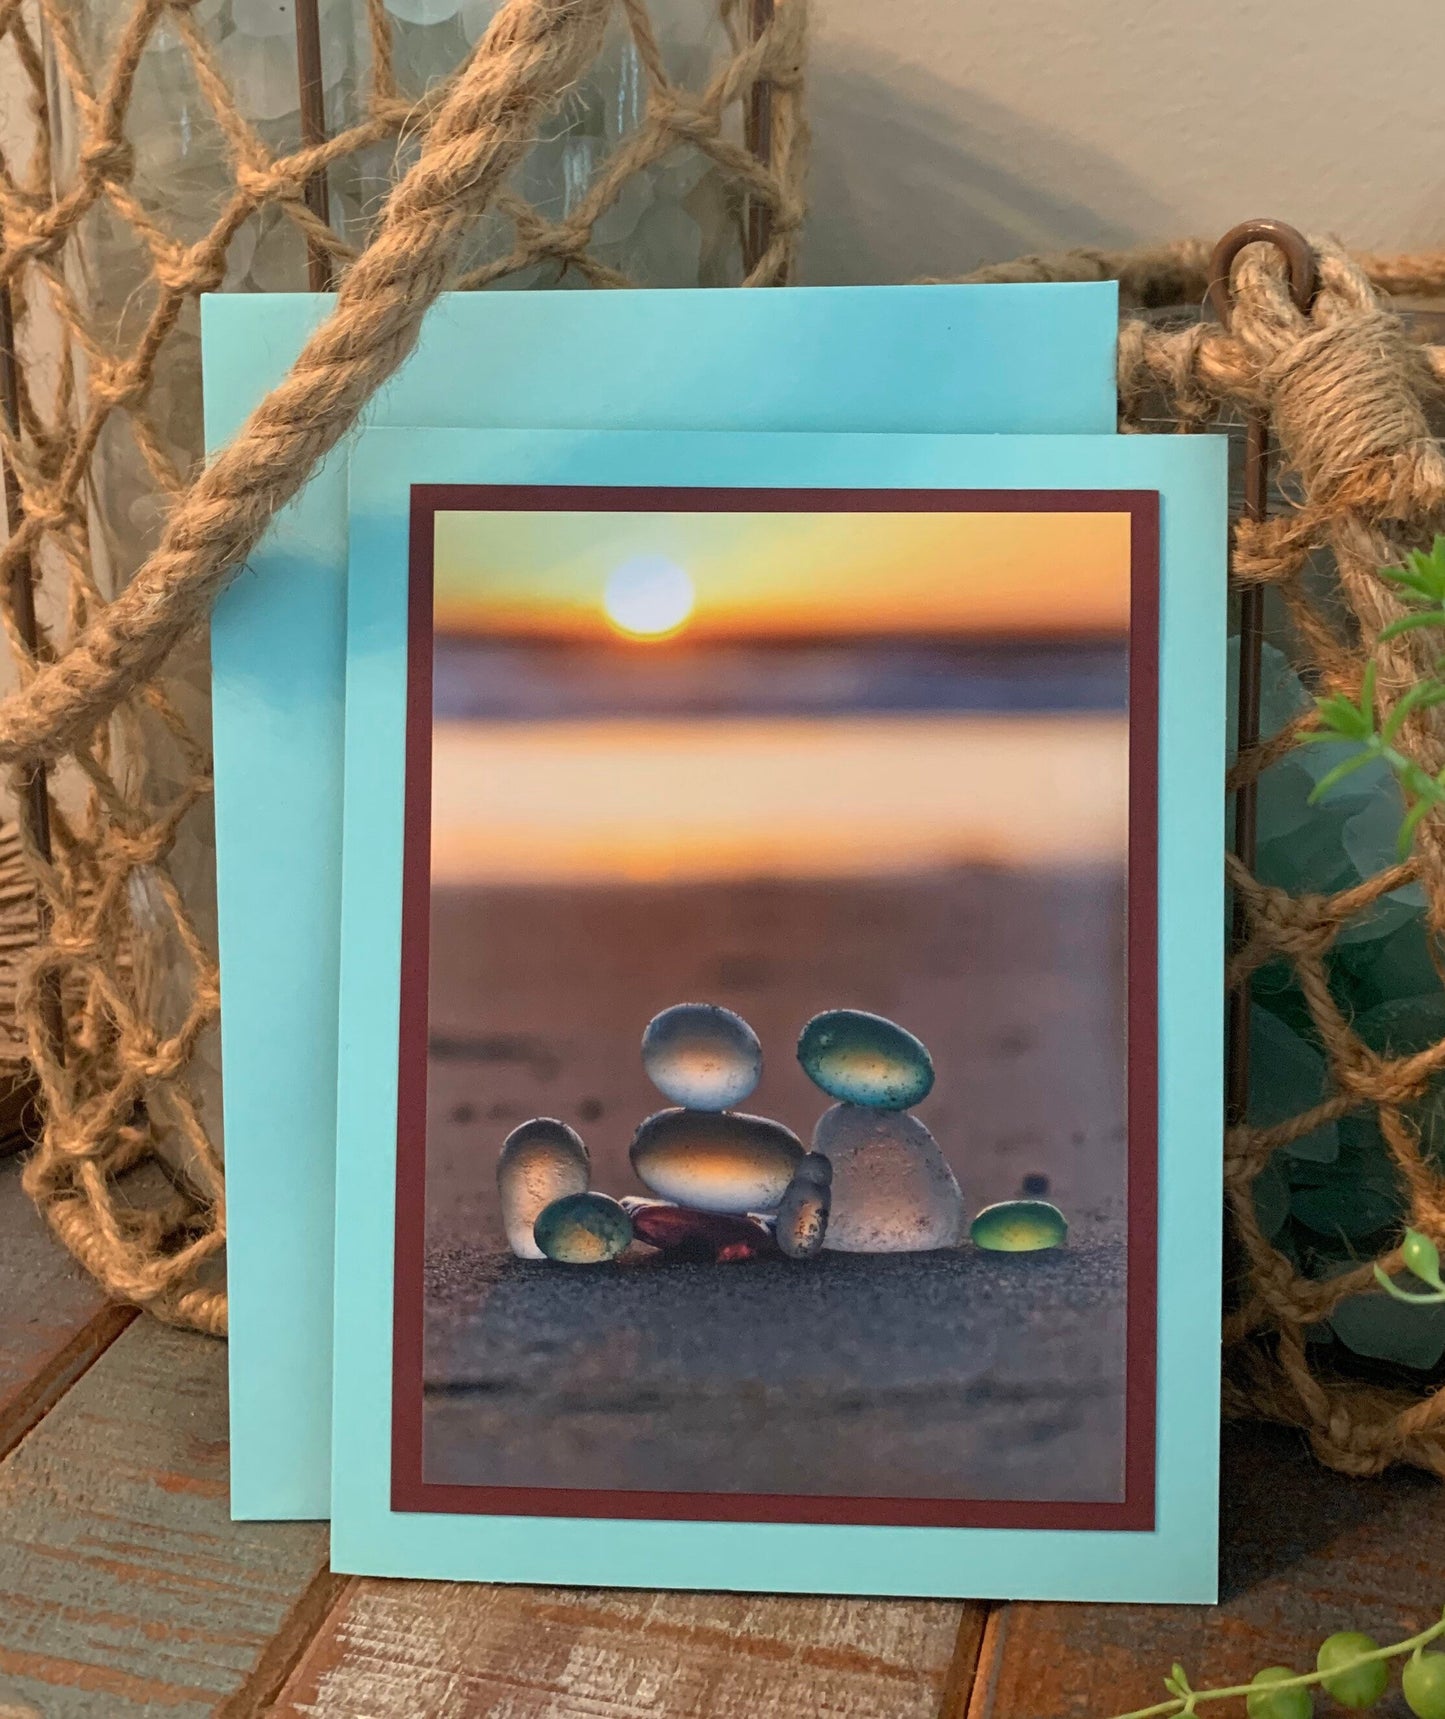 Heart Cards! Handmade seaglass photo cards with envelopes! Variety of designs packaged two per set.